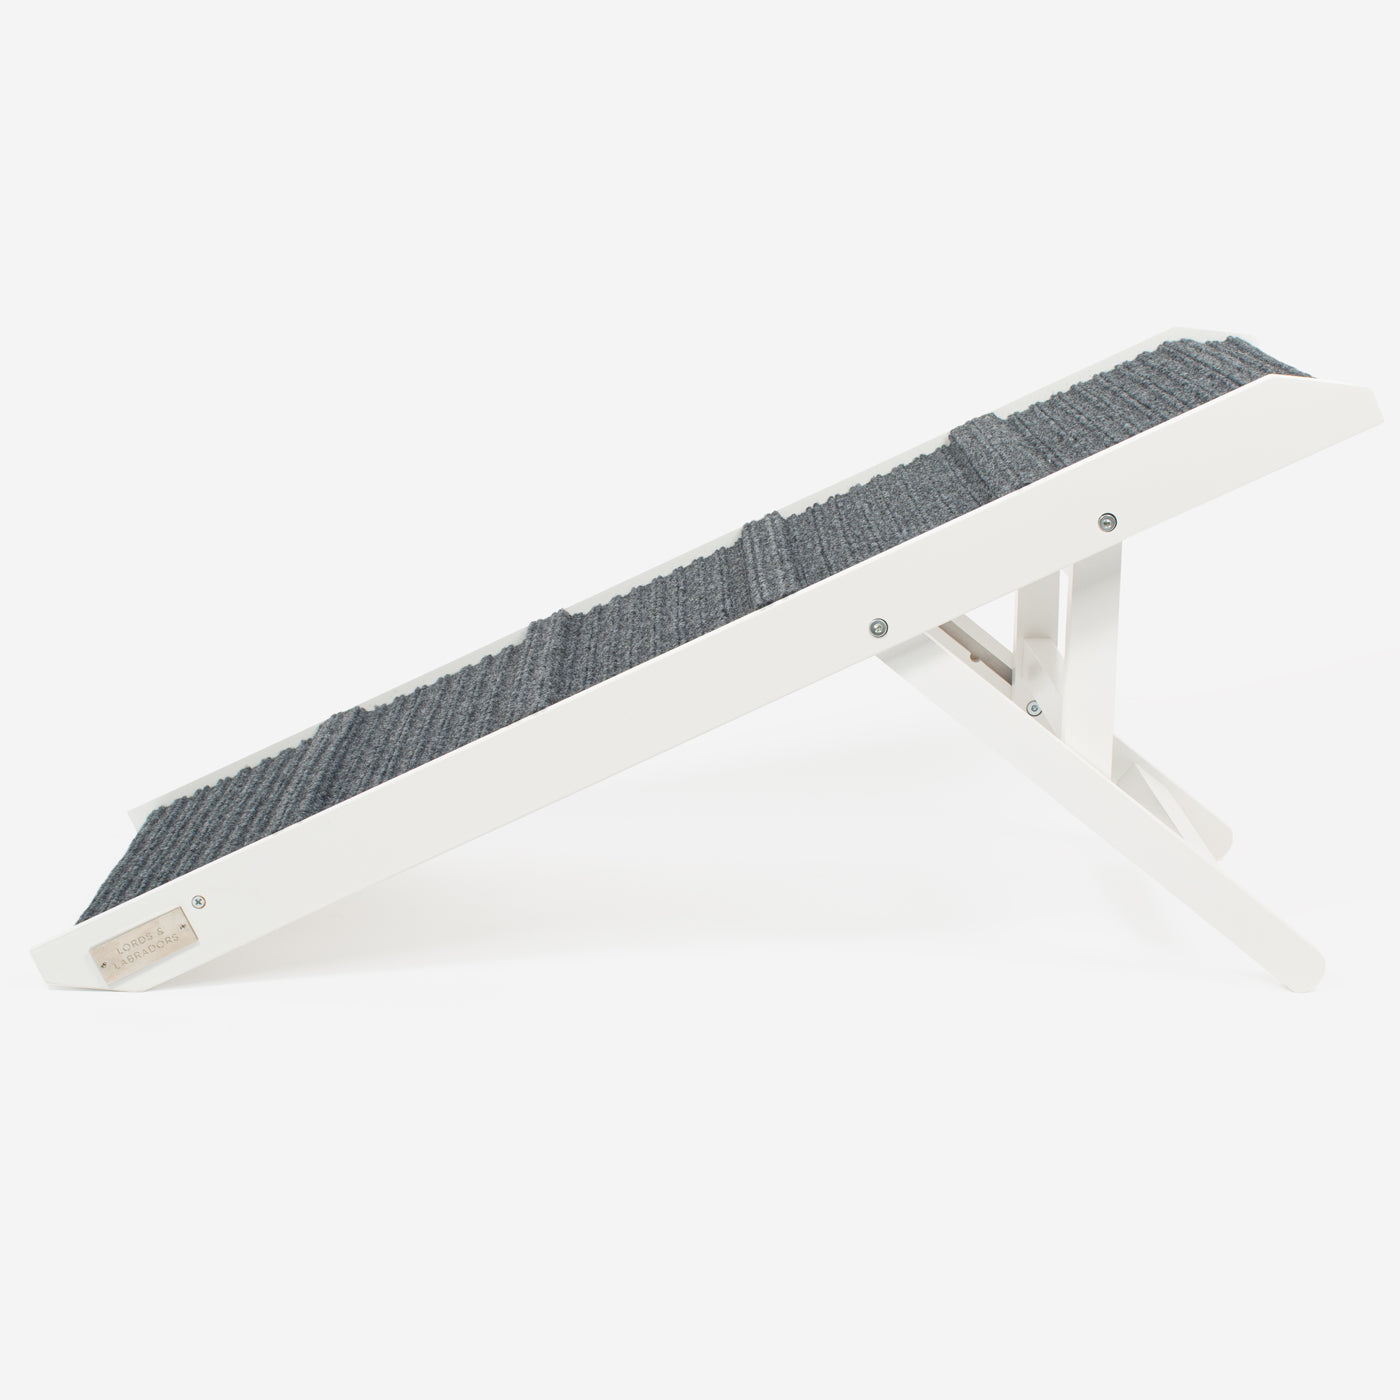 [color:white] Discover the perfect pet furniture to help aid your furry friend, our super-strong dog ramp provides the ultimate comfort when climbing to join you on the couch! Featuring grooves for extra grip! Perfect for injured pets, puppy training and elderly dogs! Available now in 2 stylish colors at Lords & Labradors US